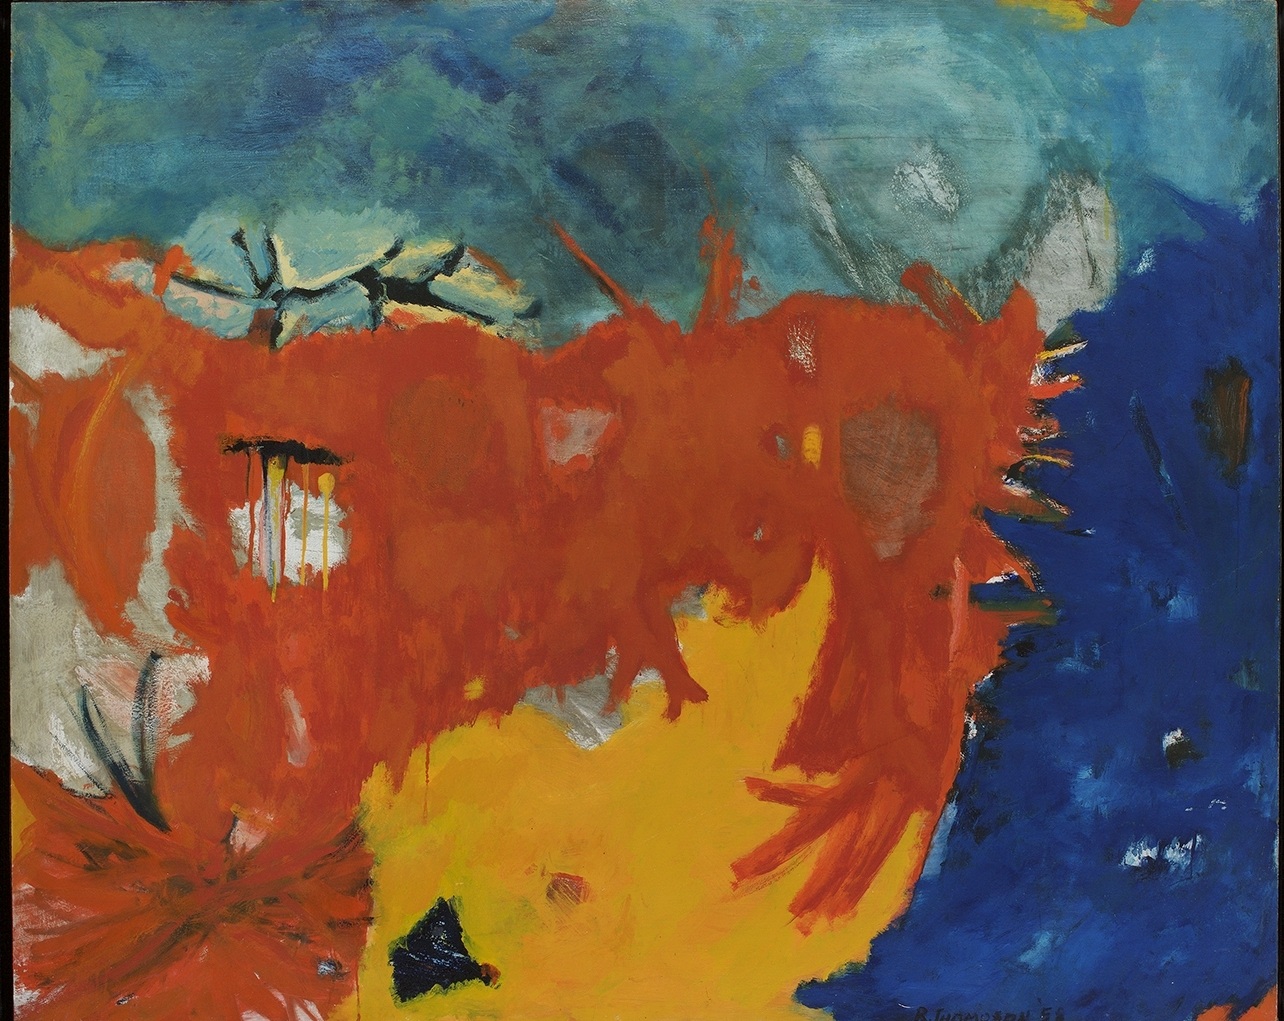 Bob Thompson, Provincetown, 1959, Oil on board, 51 x 63 inches, Signed lower right, Abstract work with orange, blue and yellow, Bob Thompson is recognized for the vibrancy of his paintings and influence to successive generations of artists.